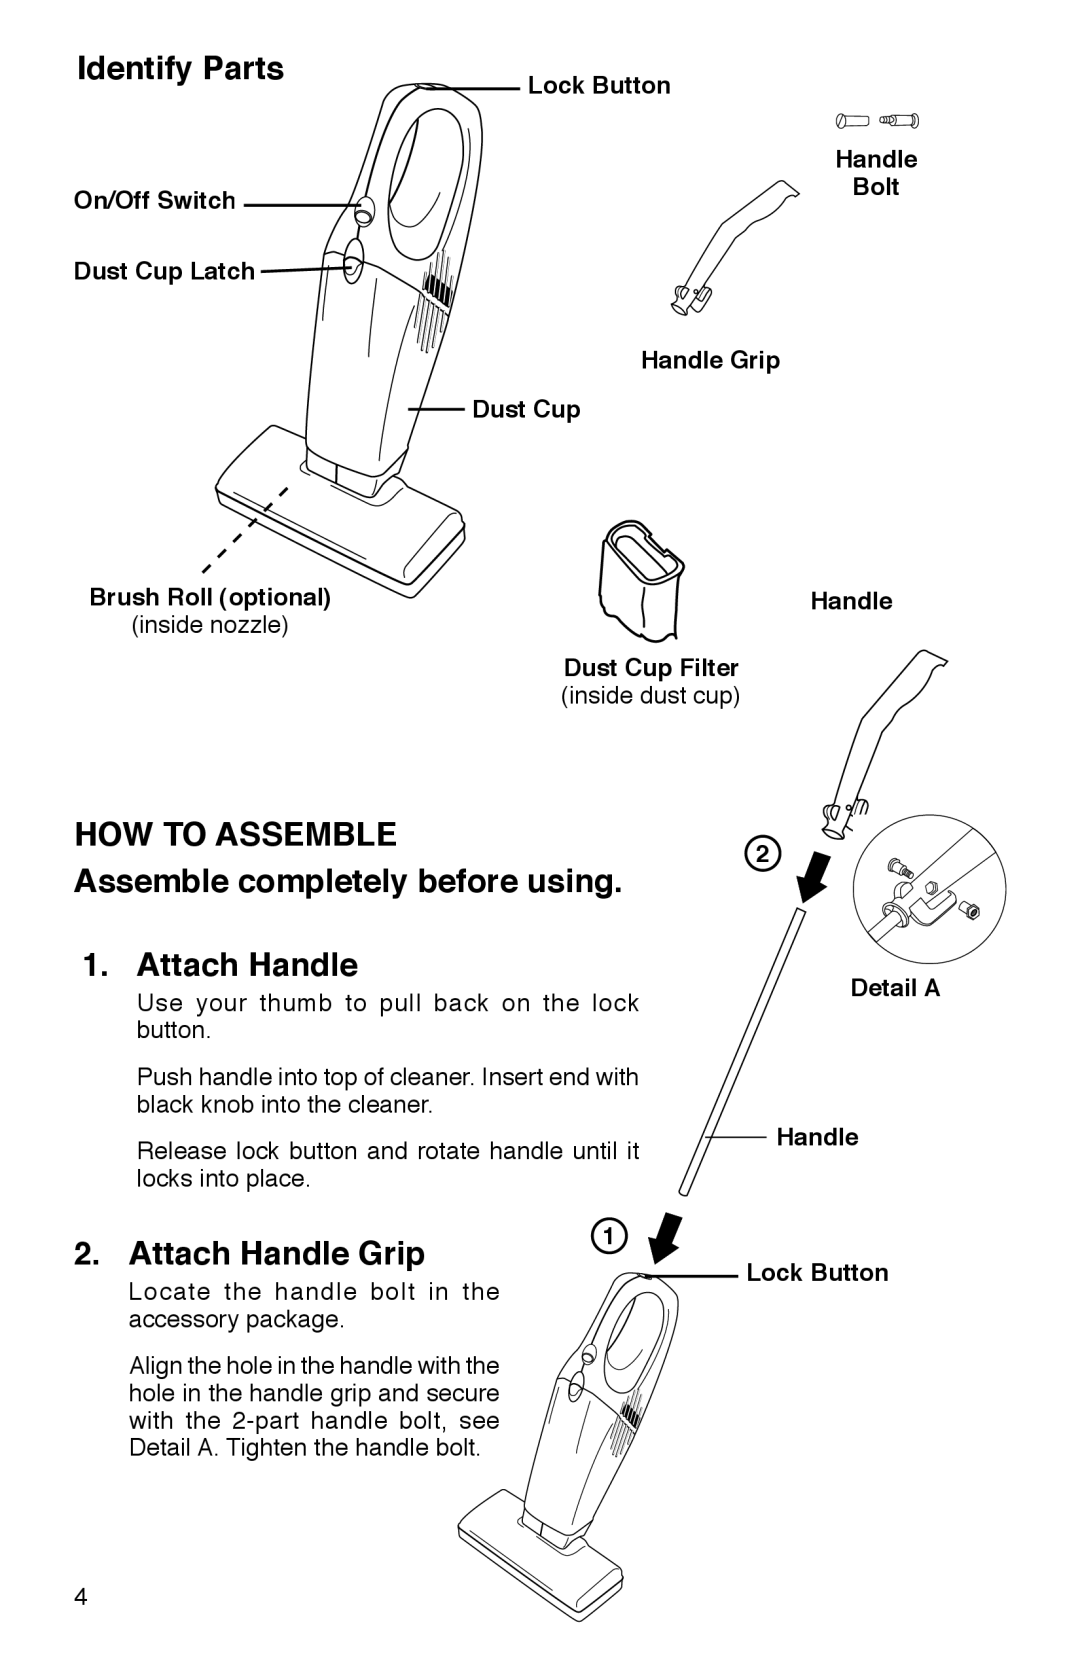 Eureka 160 Identify Parts, HOW TO ASSEMBLE Assemble completely before using 1. Attach Handle, Attach Handle Grip, Bolt 